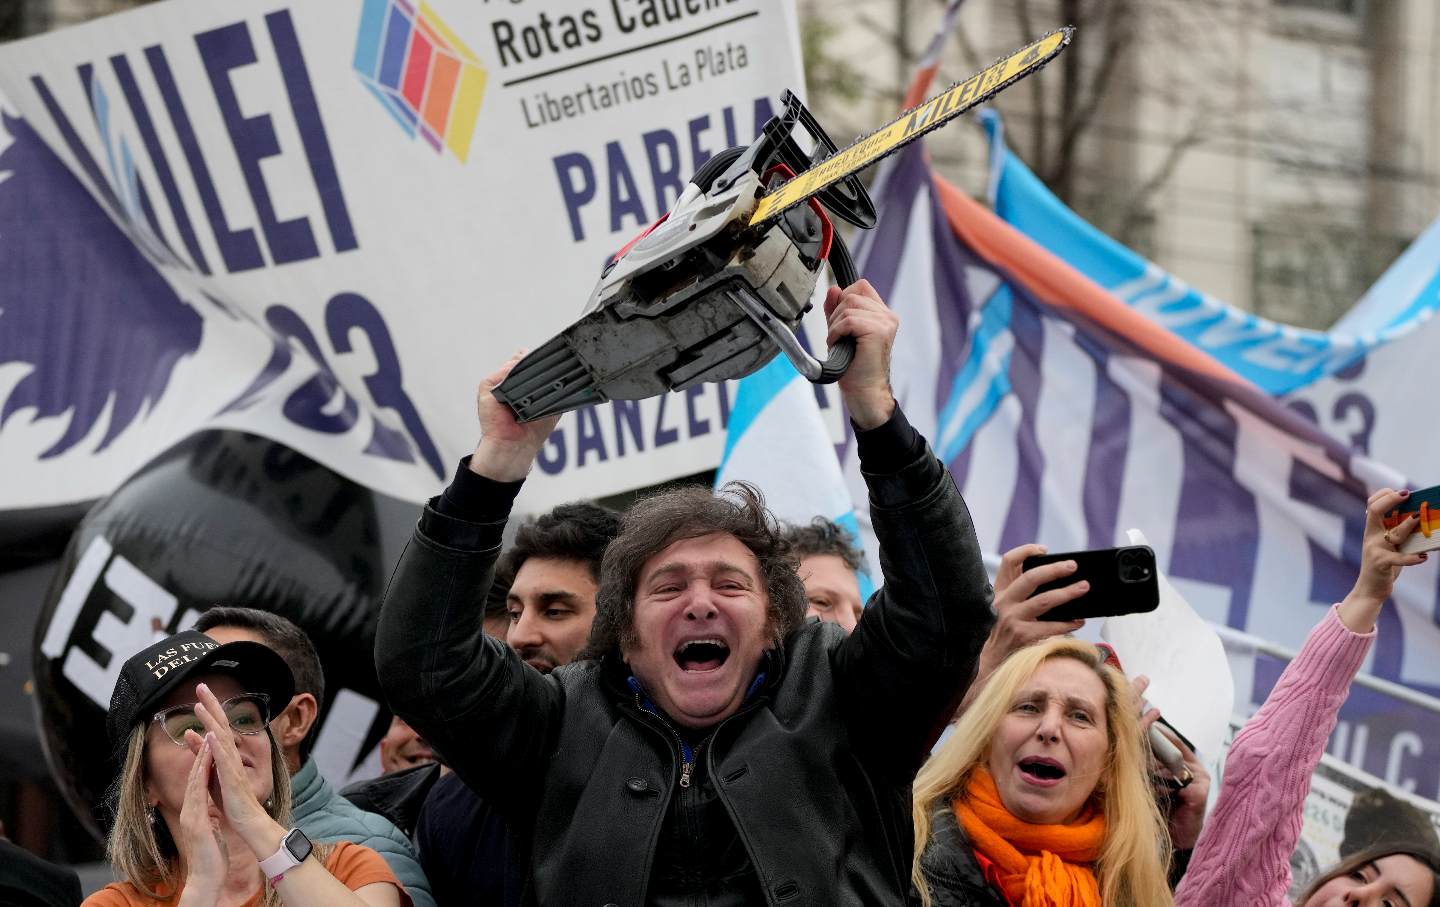 Javier Milei brandishes a chainsaw during a rally in La Plata, Argentina on September 12.